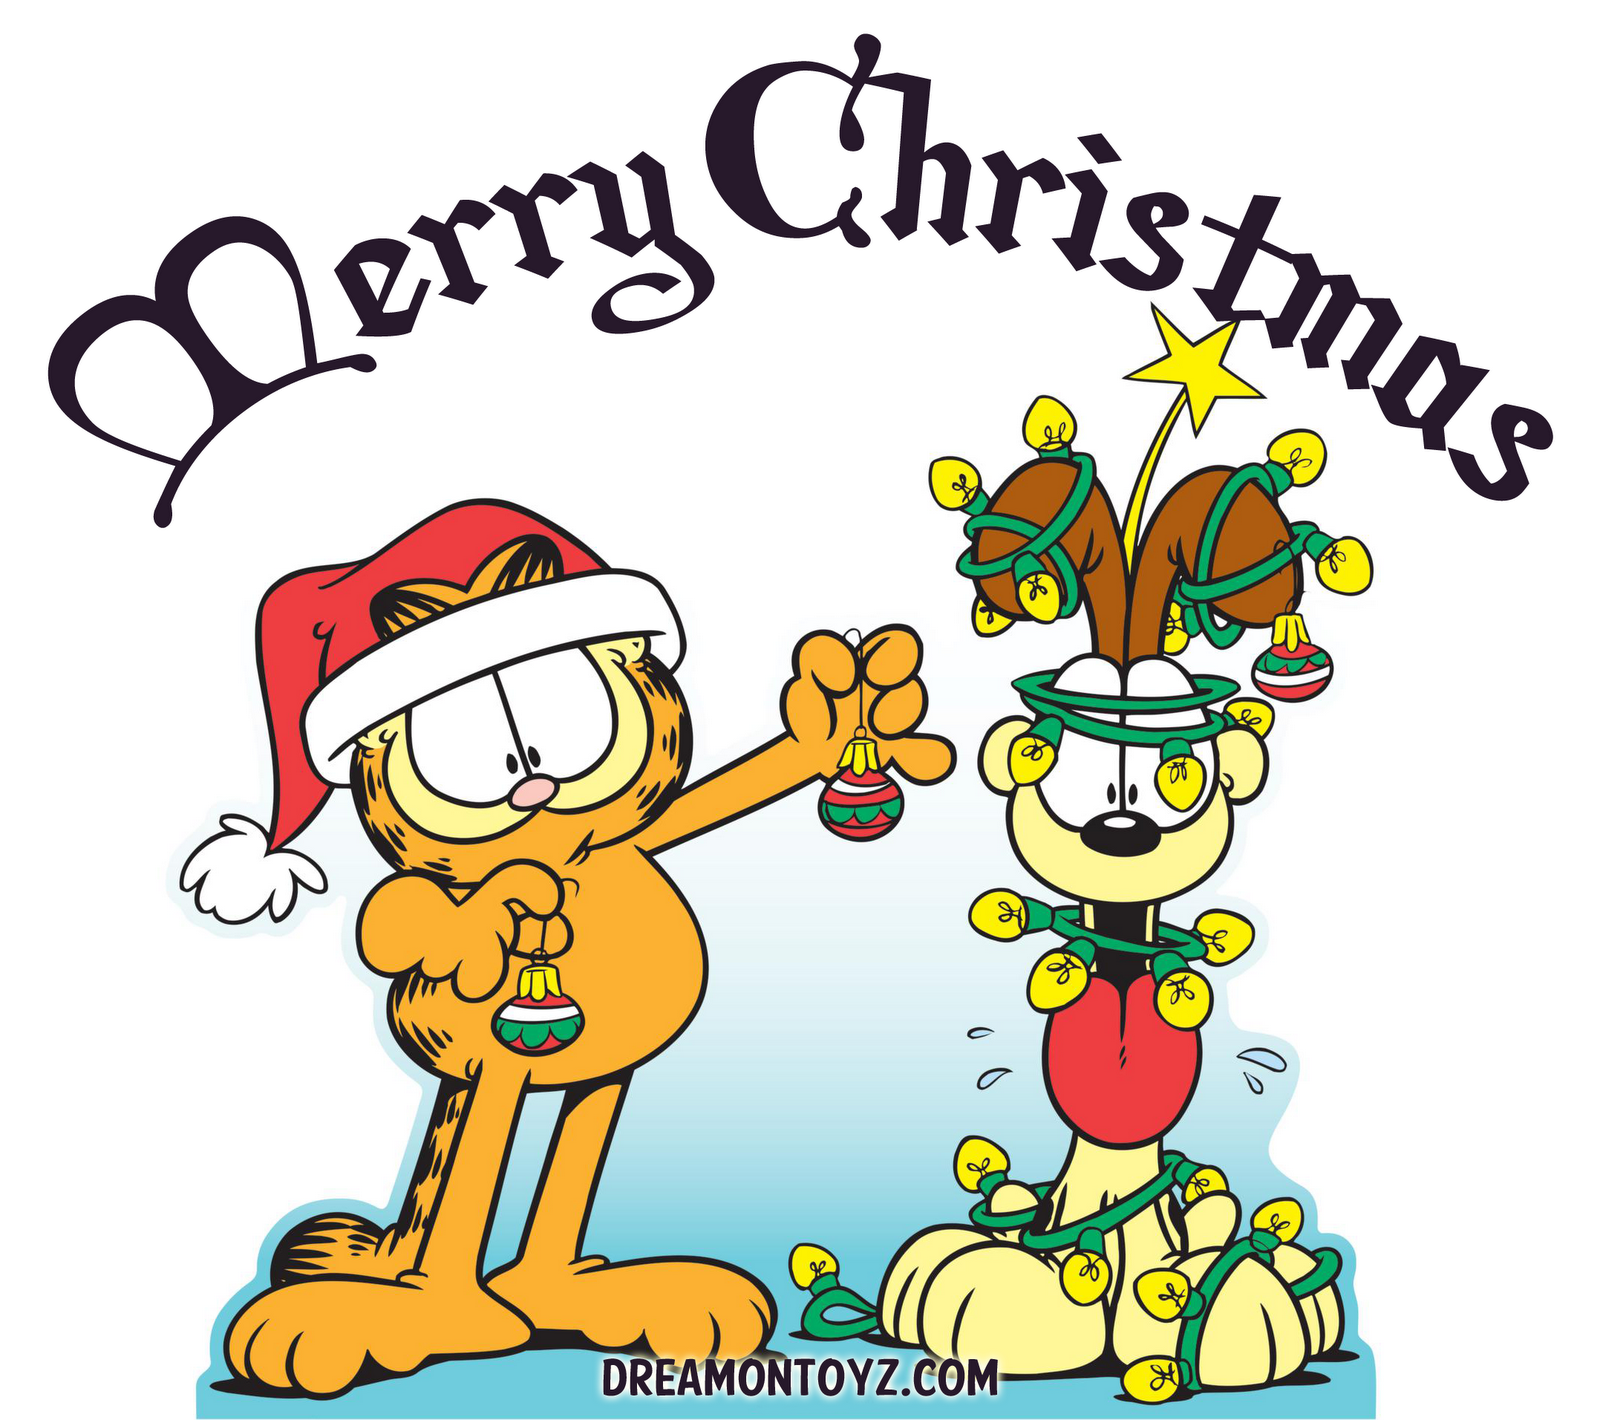 Merry Christmas Cartoon Pictures